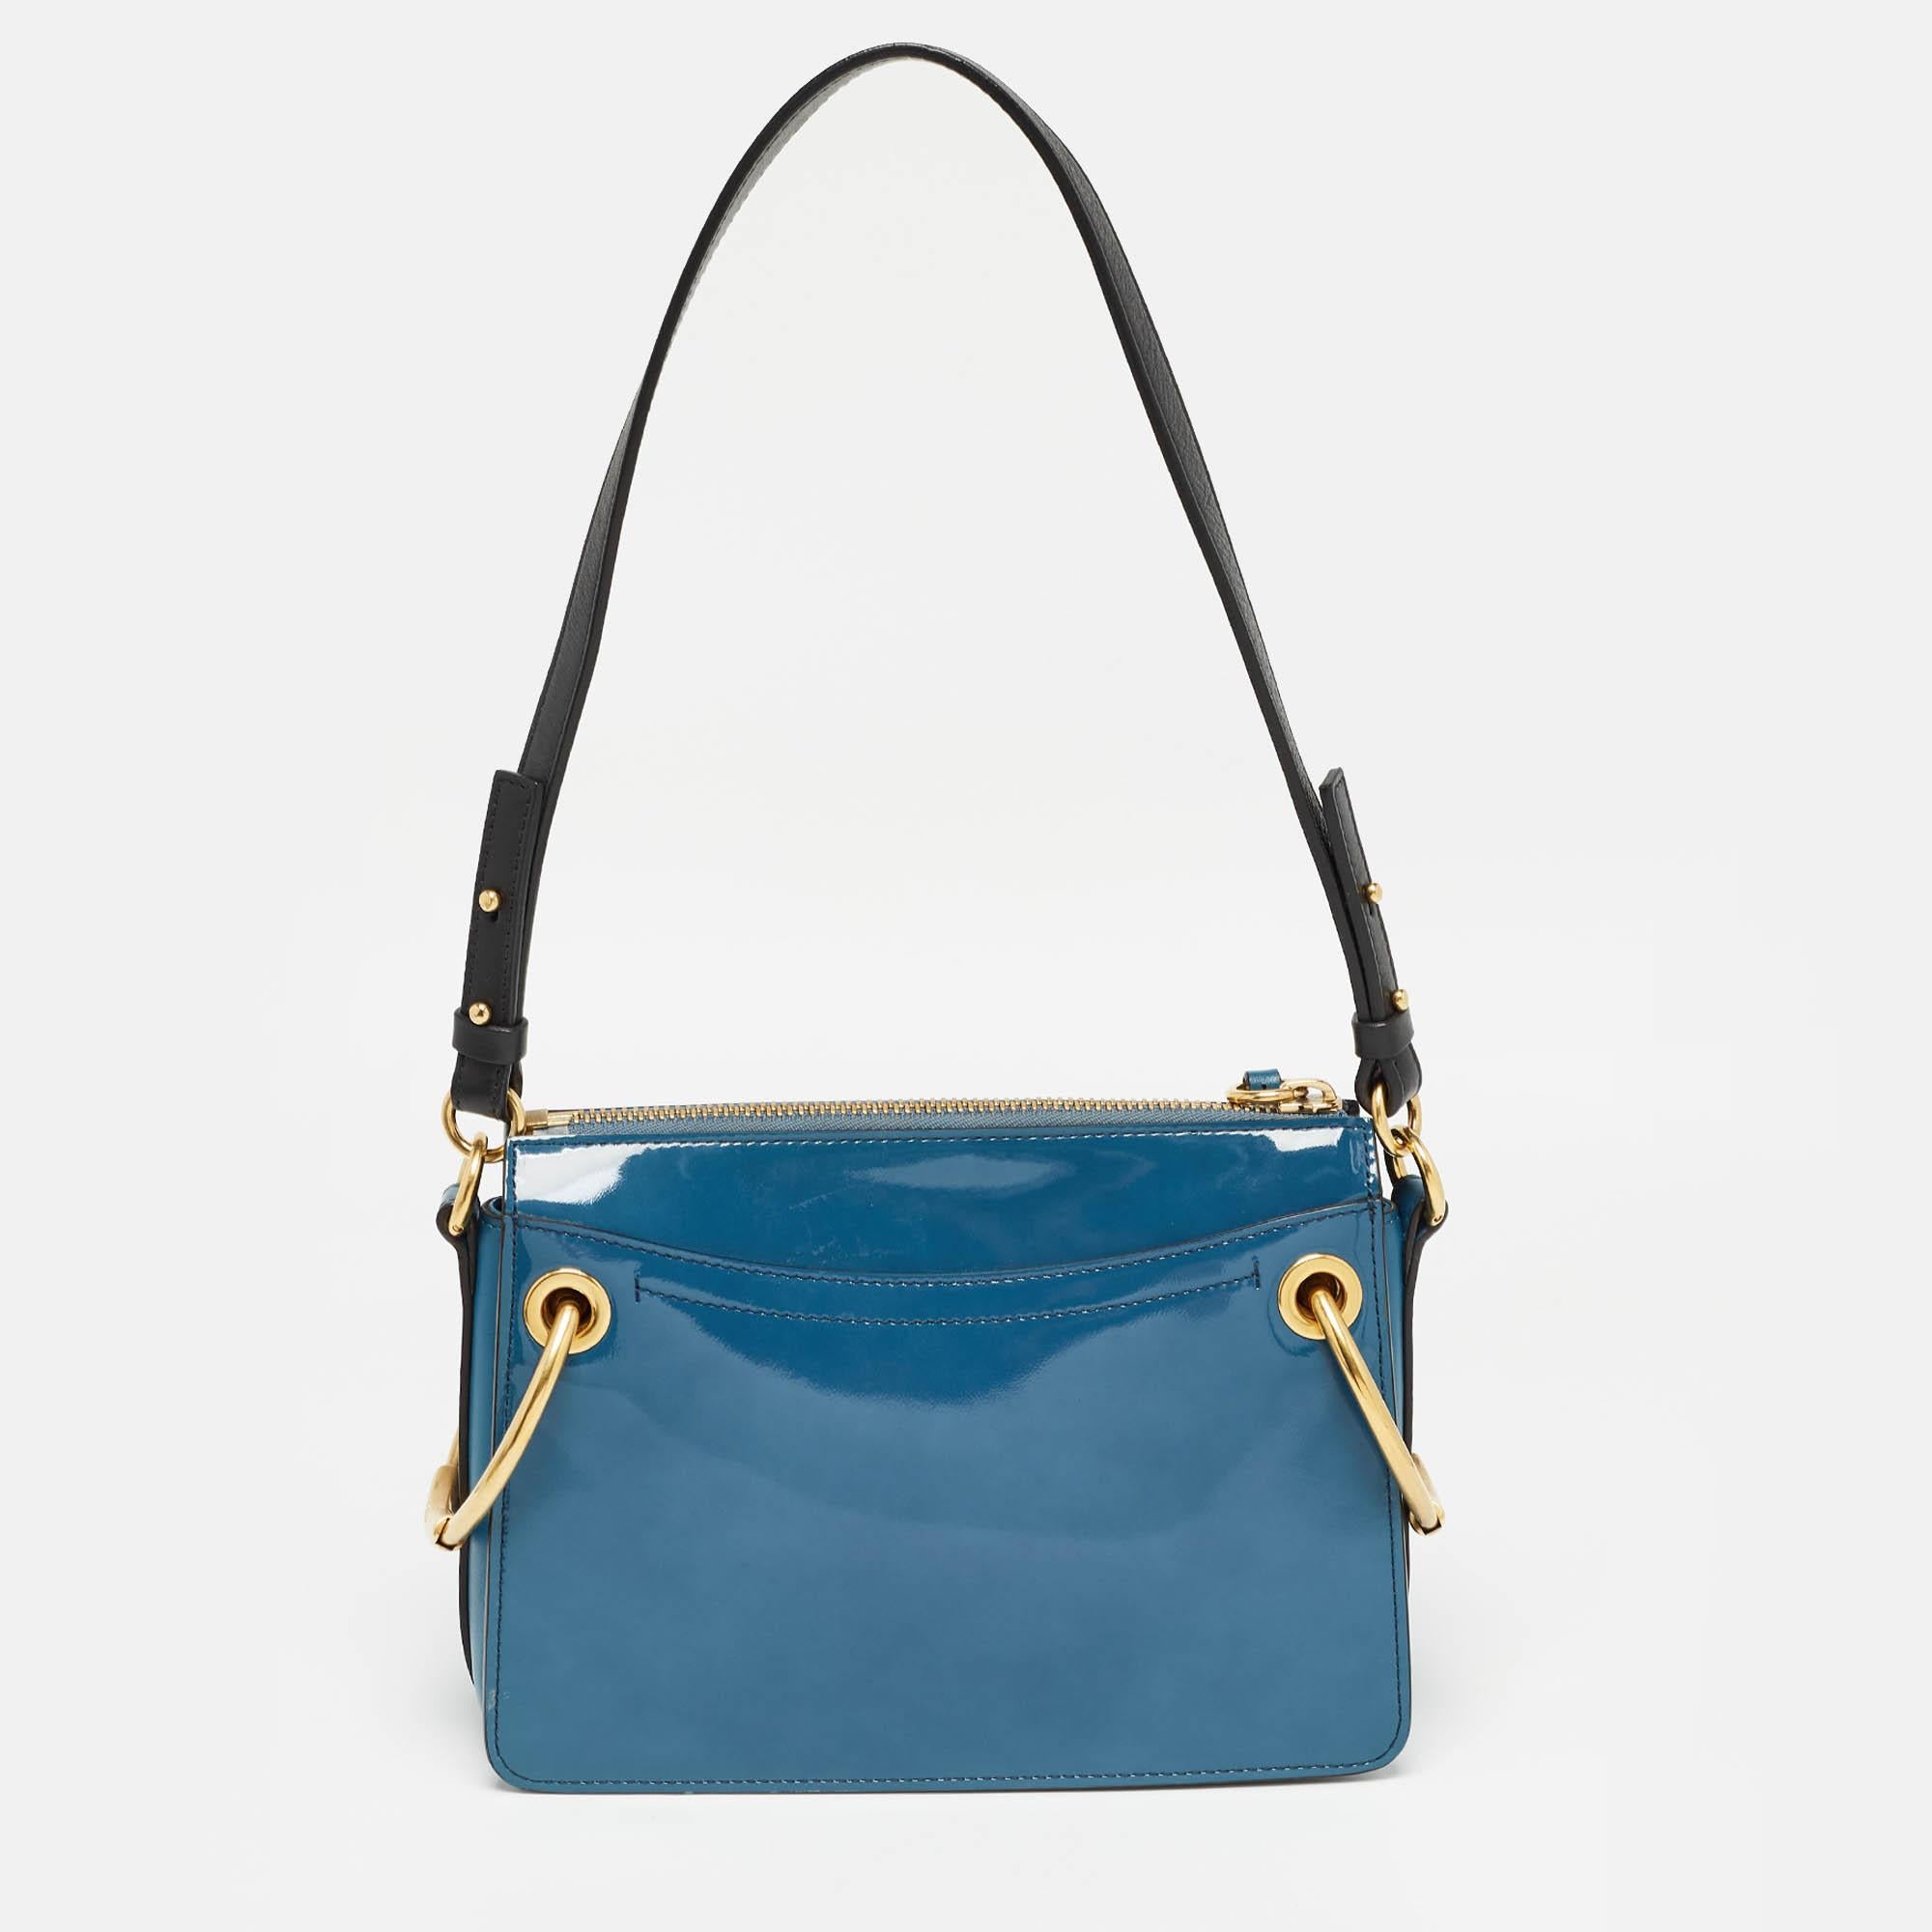 Make a stunning appearance every time you carry this Roy bag by Chloe. Brilliantly designed, this bag is made from blue leather and suede on the exterior and flaunts gold-toned hardware. Swing this beautiful bag with you and fetch nothing but